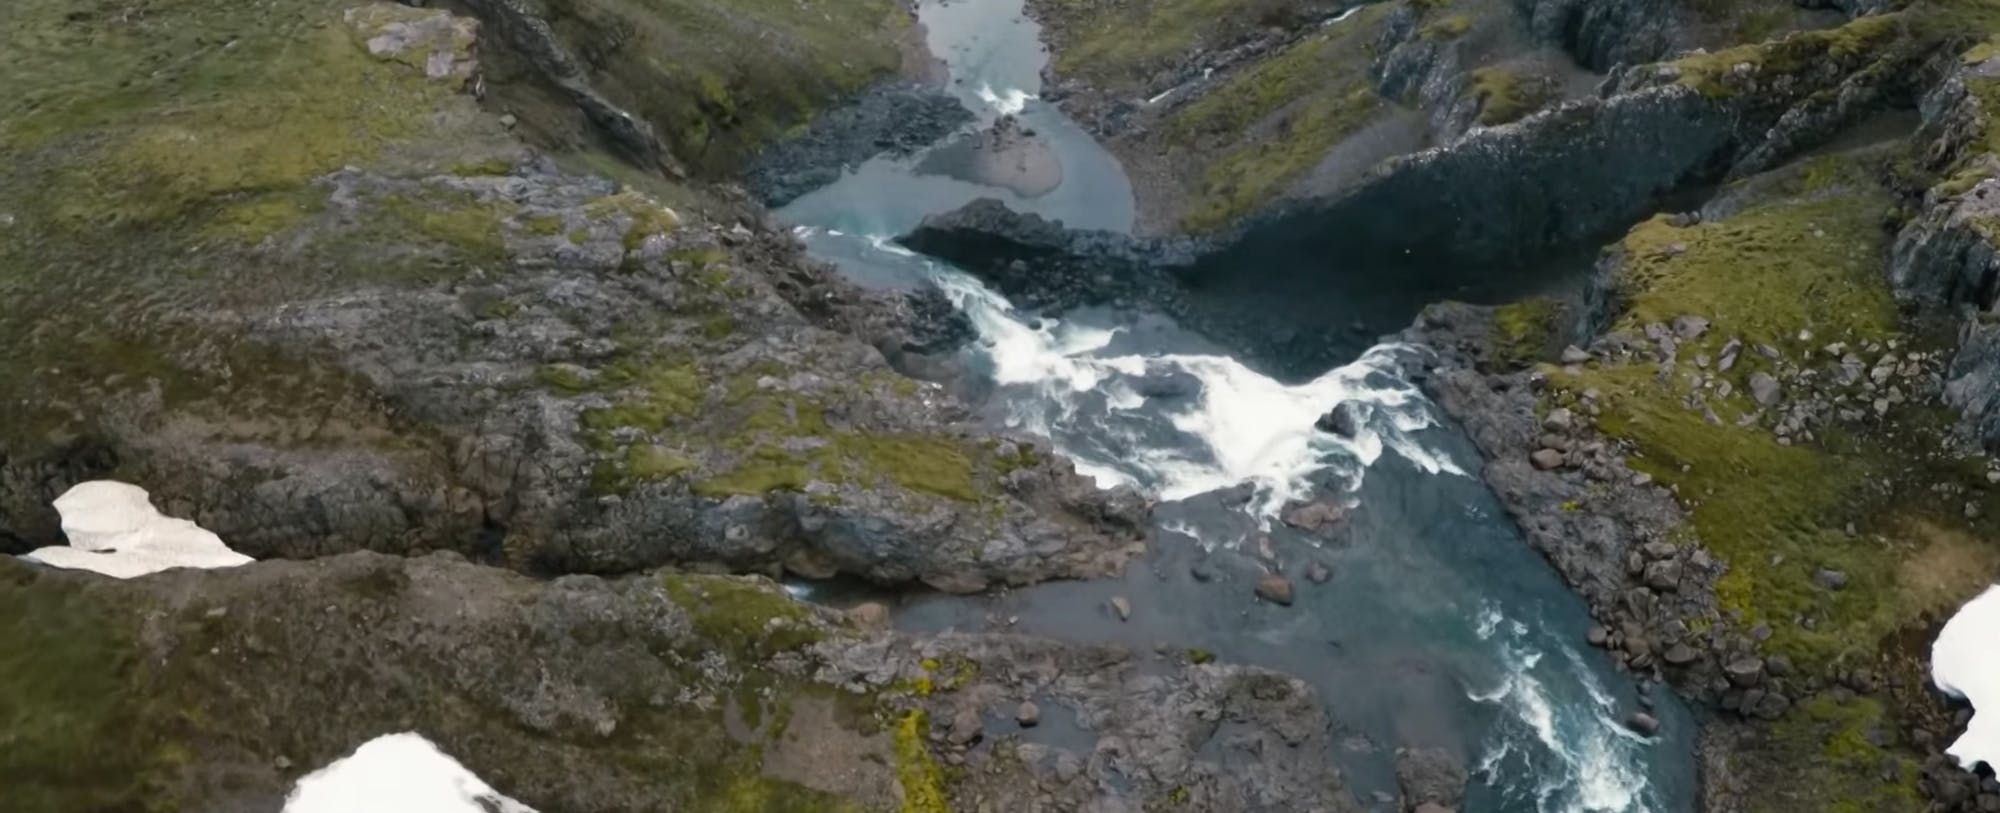 Kayaking Iceland: Crazy Waterfalls and Surreal Landscapes